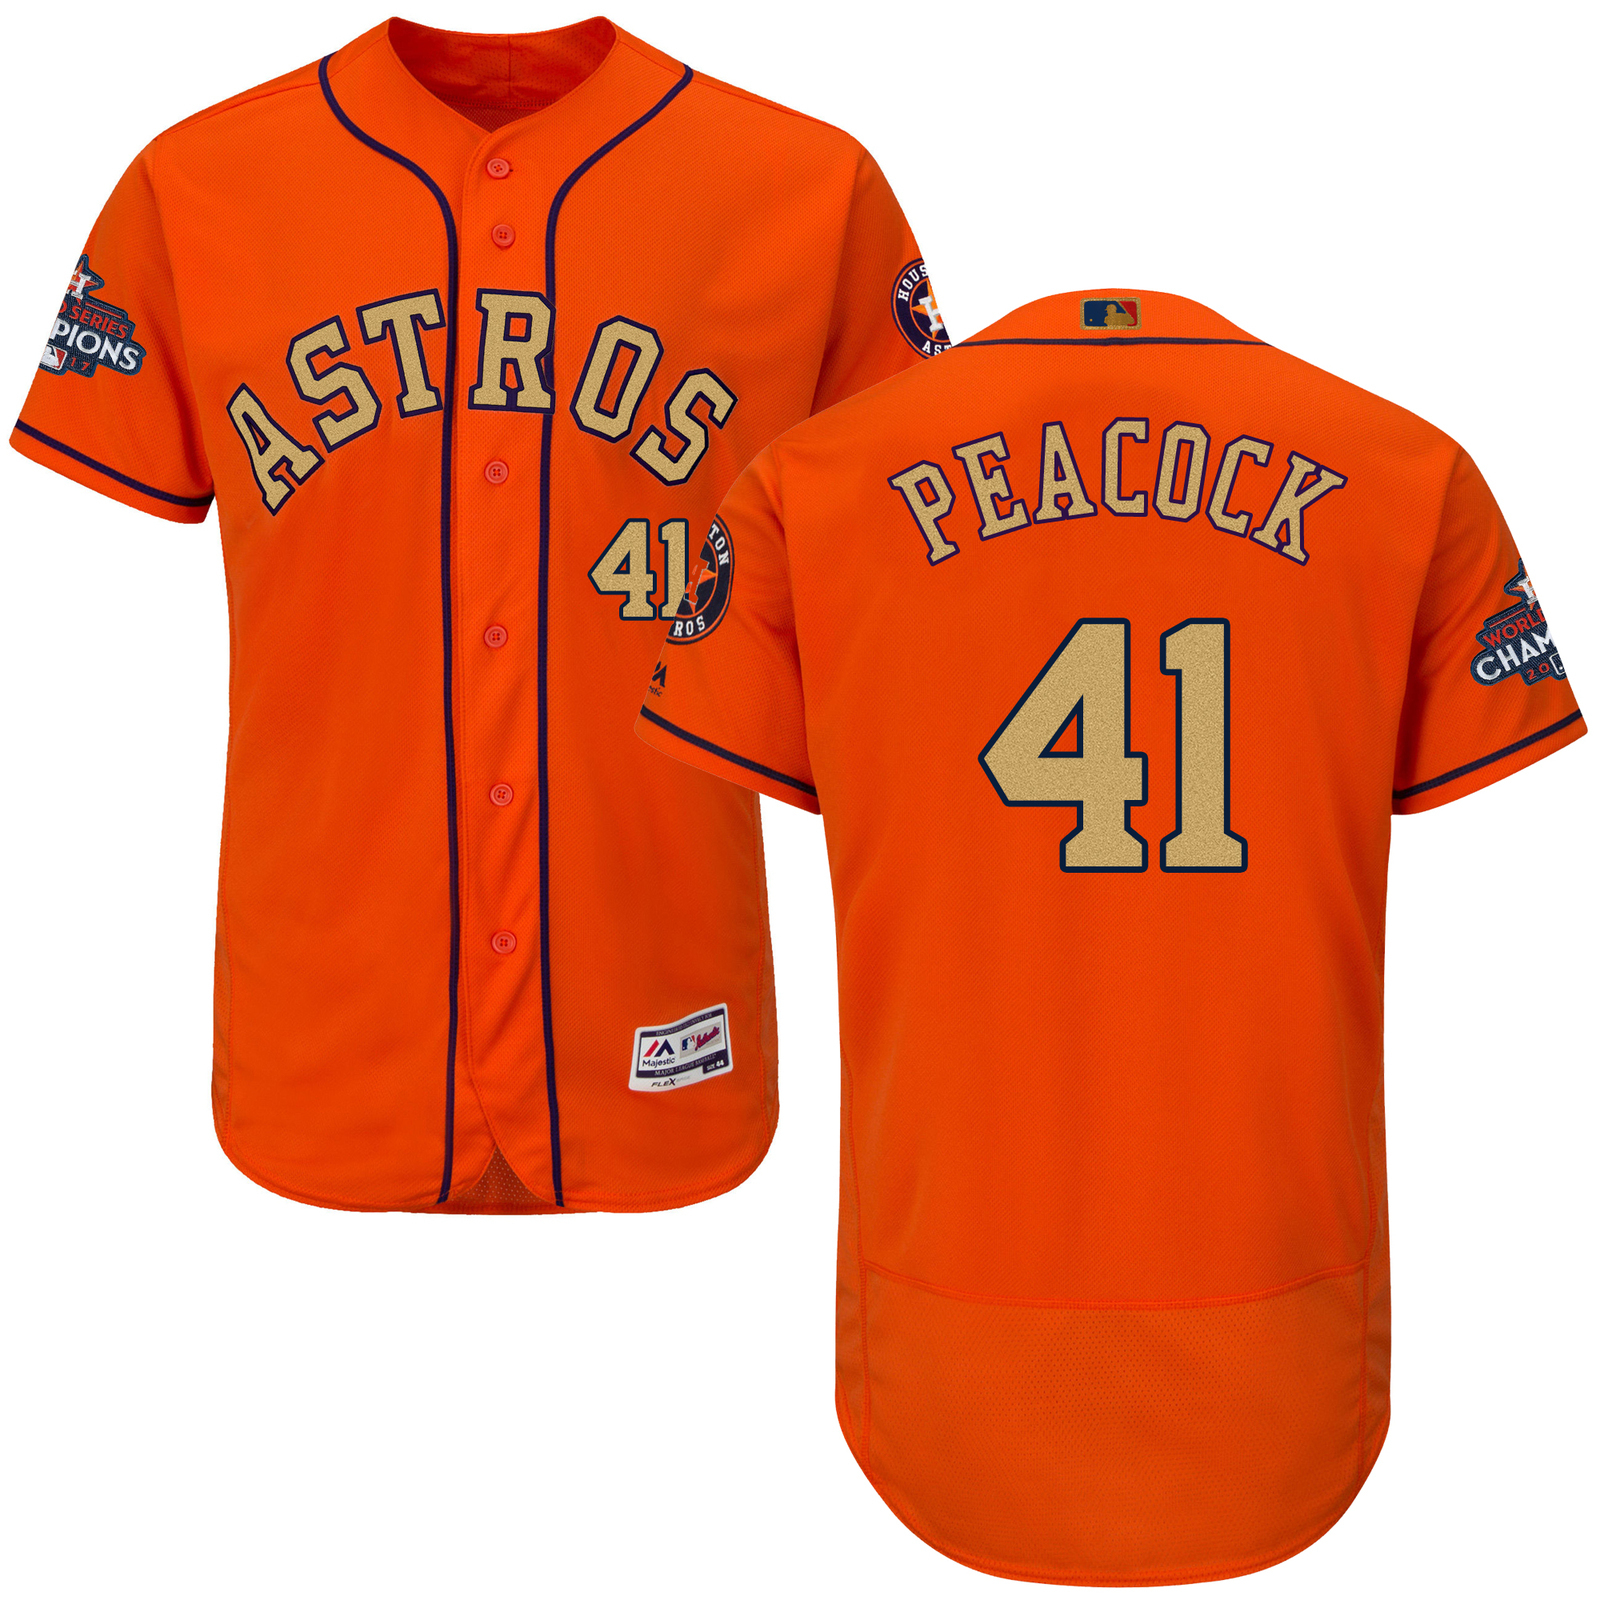 Houston Astros #41 Brad Peacock Jersey Sewn on Champions Gold Edition Orange Fle - Other Fan ...